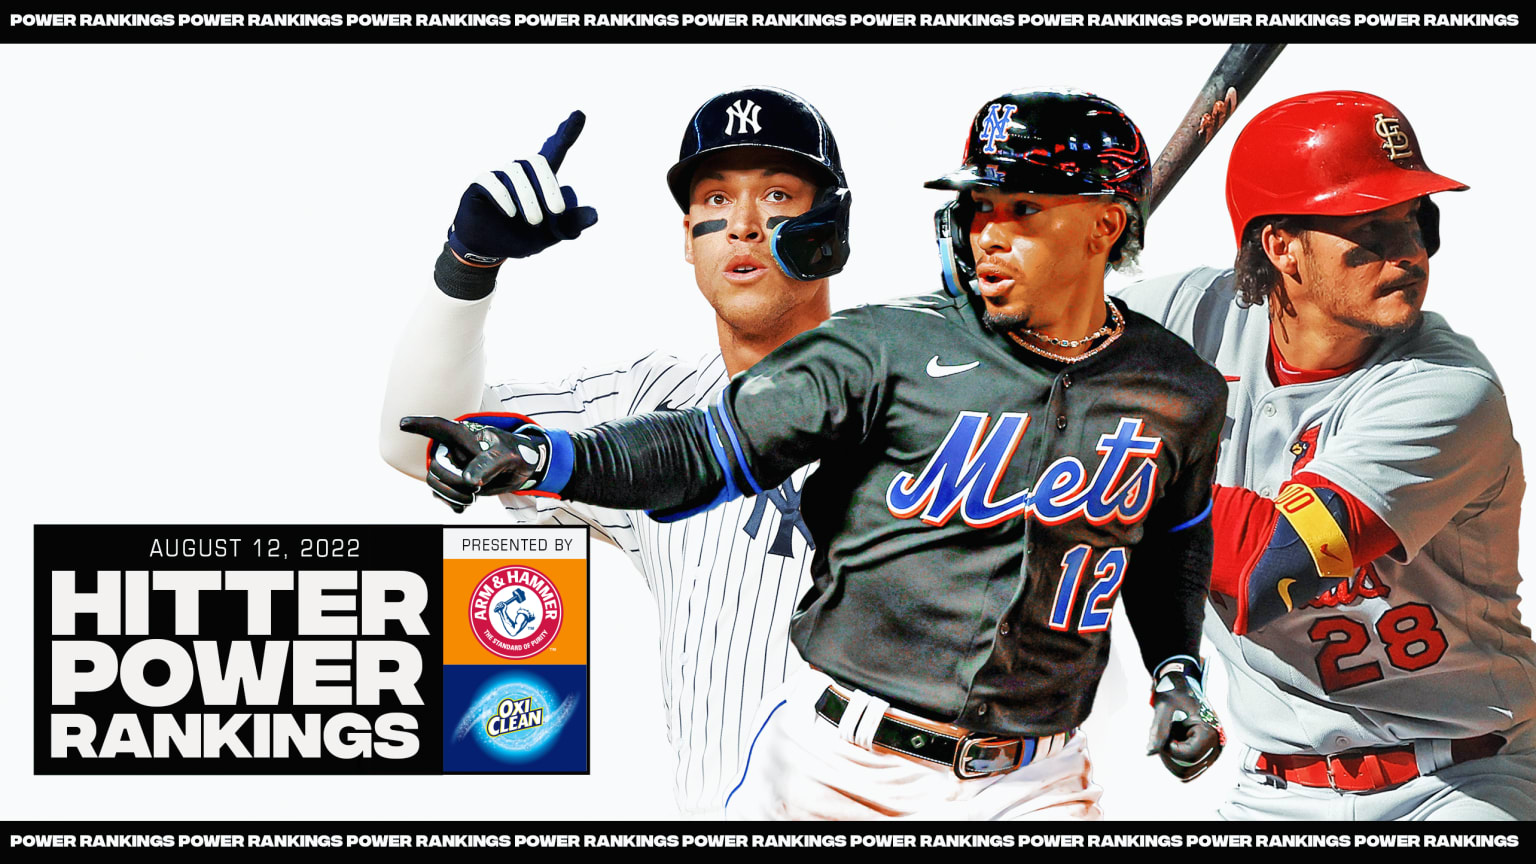 The words HITTER POWER RANKINGS appear in the lower left corner, followed by images of Aaron Judge, Francisco Lindor and Nolan Arenado